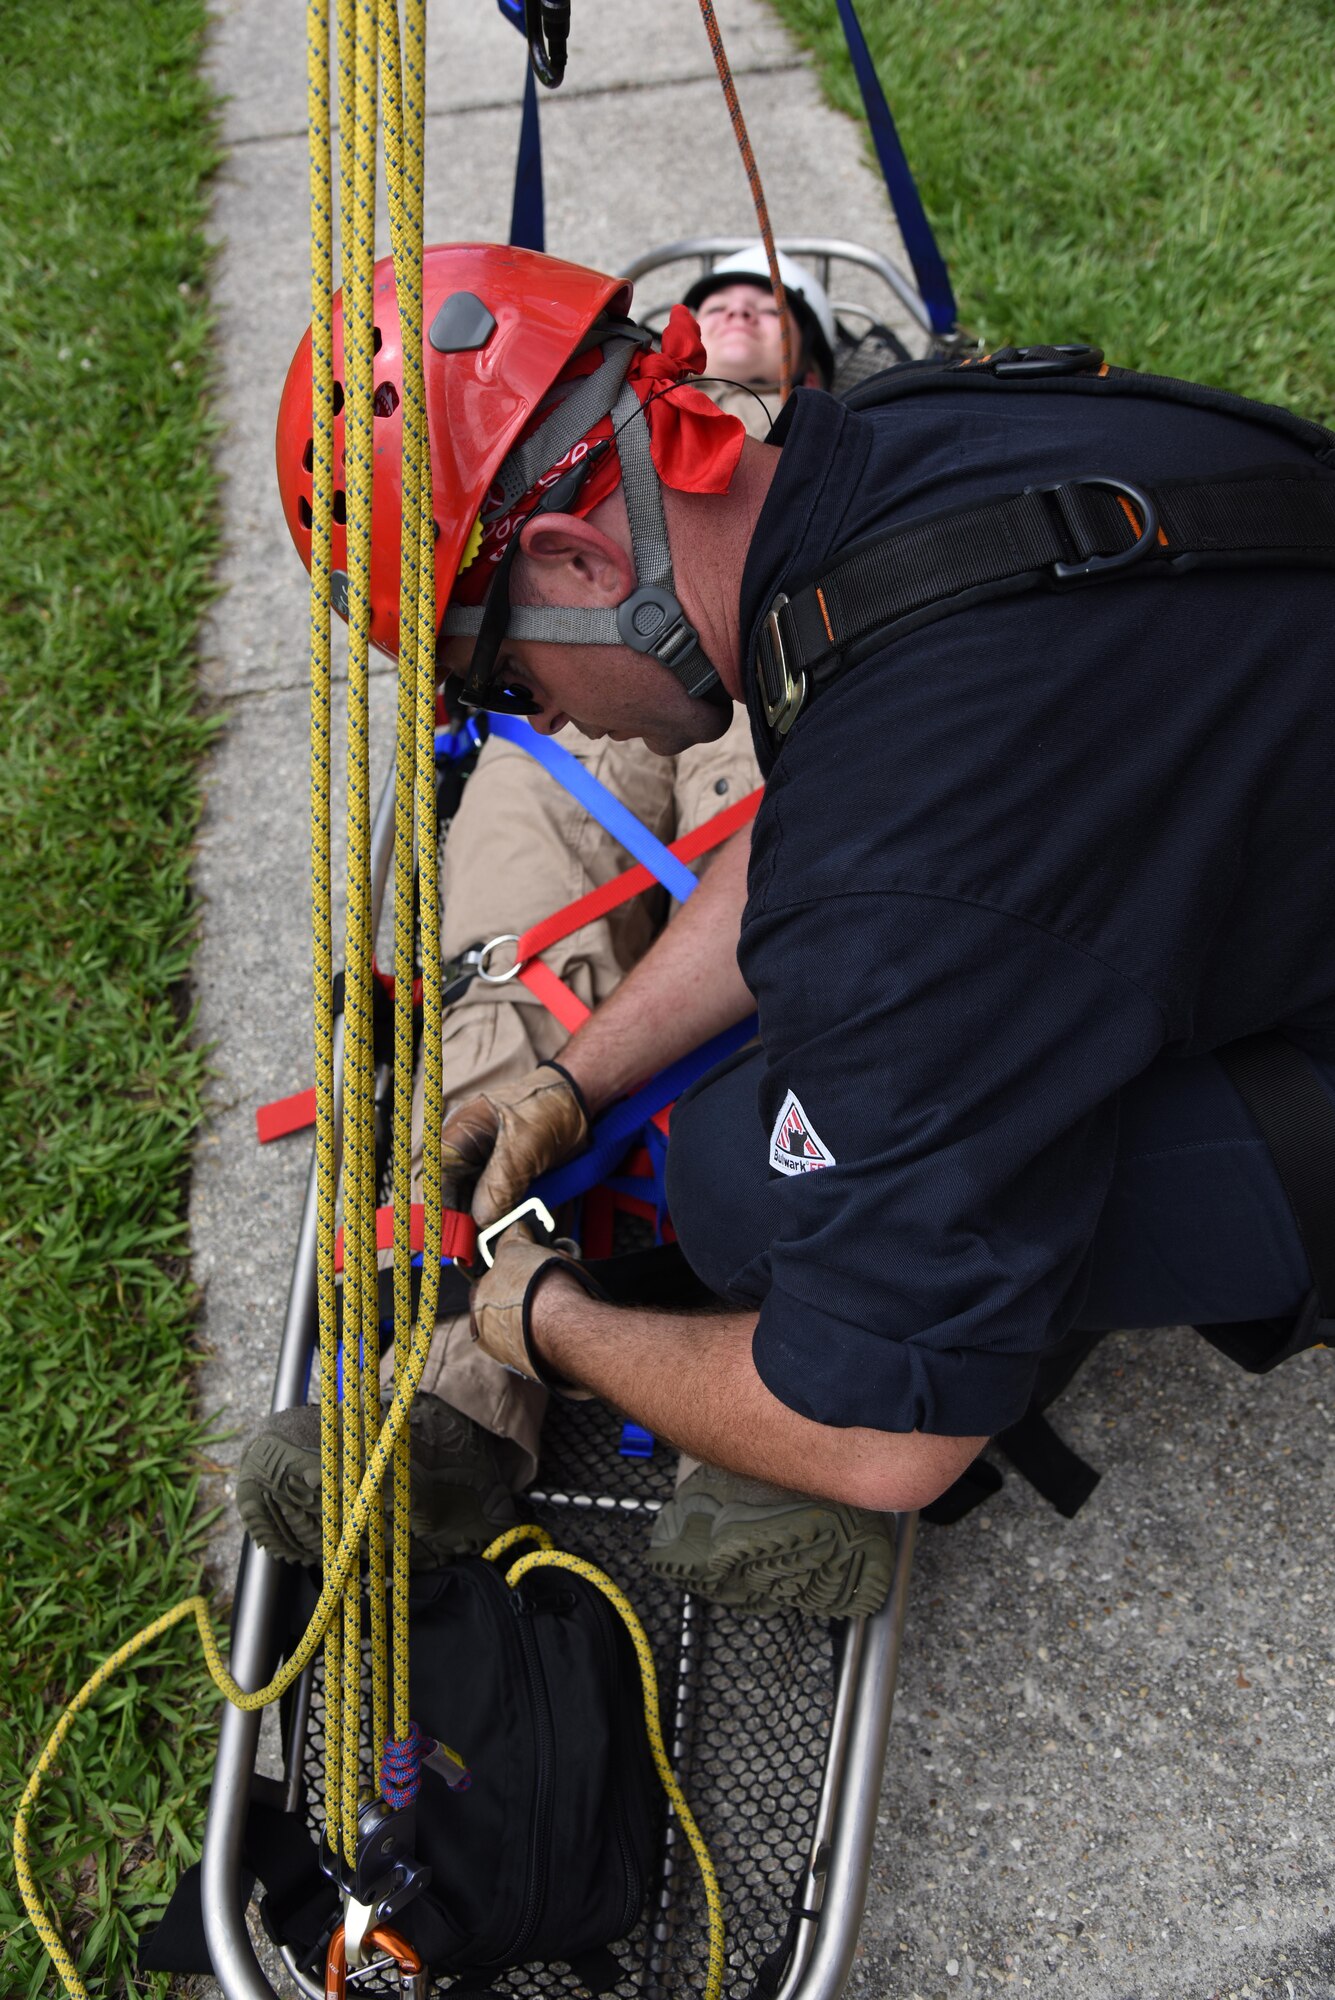 Robert Hornsby, Biloxi Firefighter, secures Airman 1st Class Hannah Reichert, Keesler Firefighter, in a stoke basket at the bottom of the Weather Training Complex during rope rescue operations training June 14, 2017, on Keesler Air Force Base, Miss. Keesler hosted the advanced rescue certification training course, which consisted of confined space rescue, high and low angle rescue and stokes basket rescue operations, for Keesler and Biloxi Firefighters. (U.S. Air Force photo by Kemberly Groue)